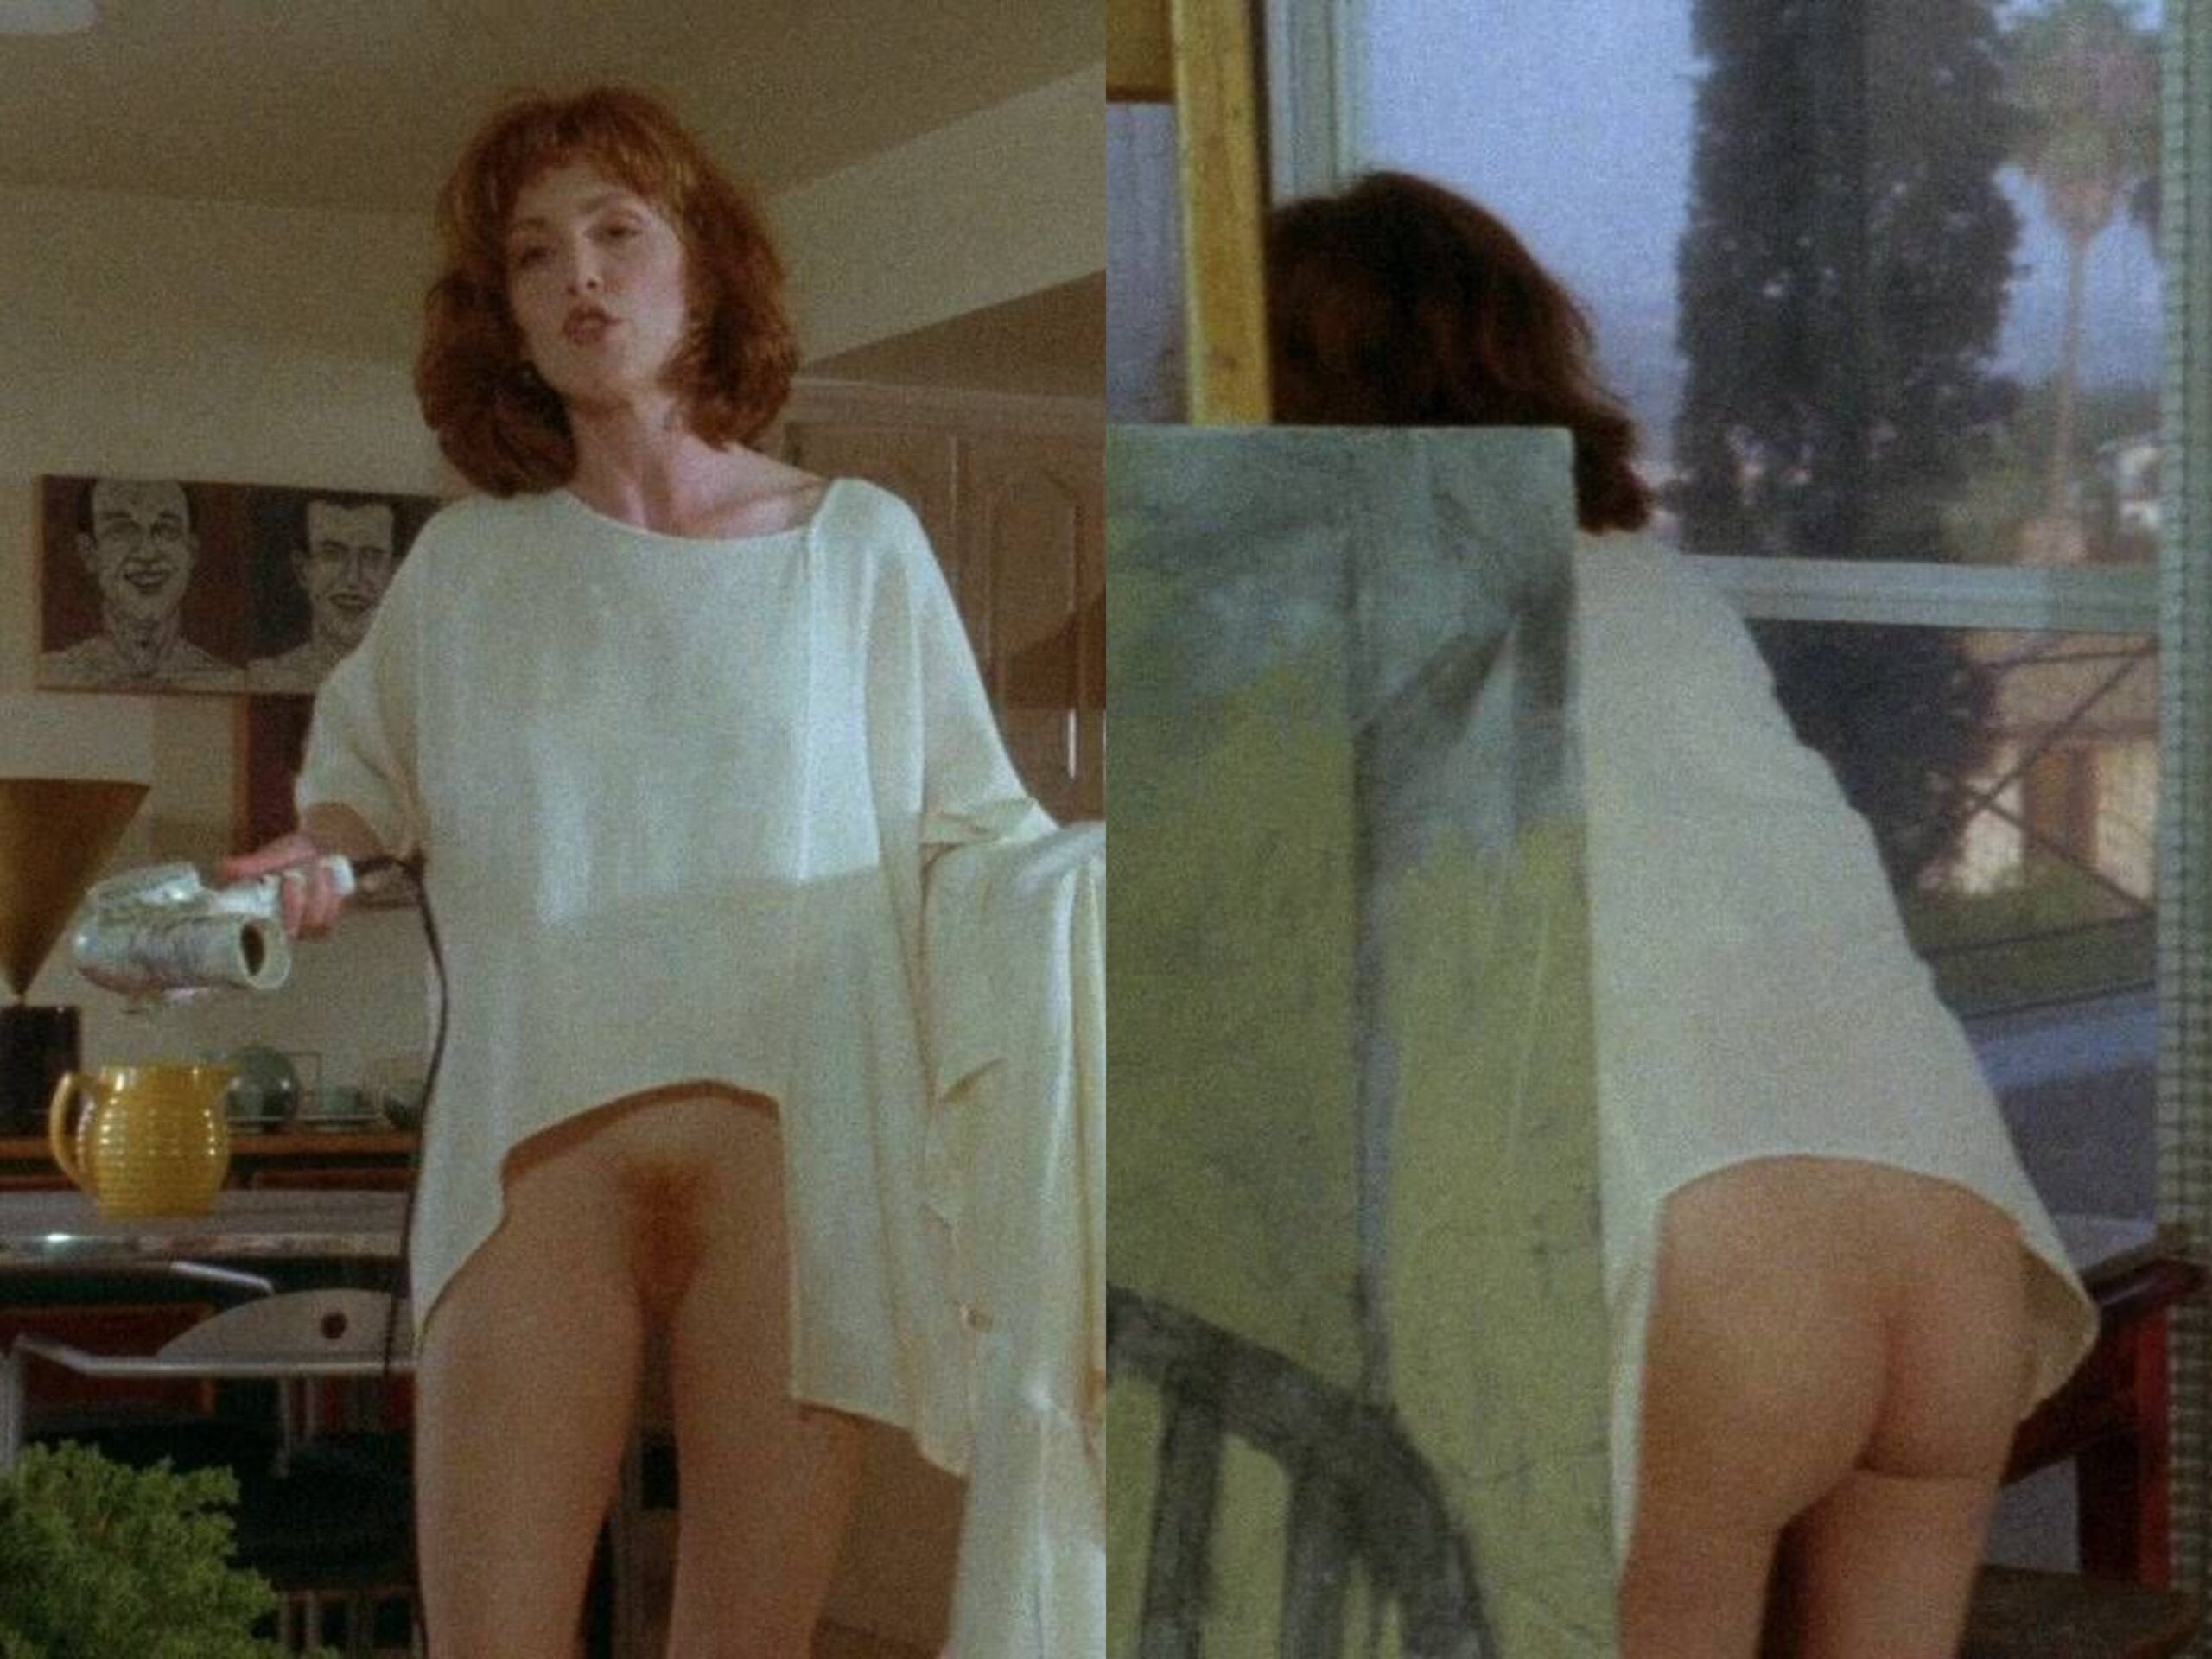 Of naked julianne moore pictures 